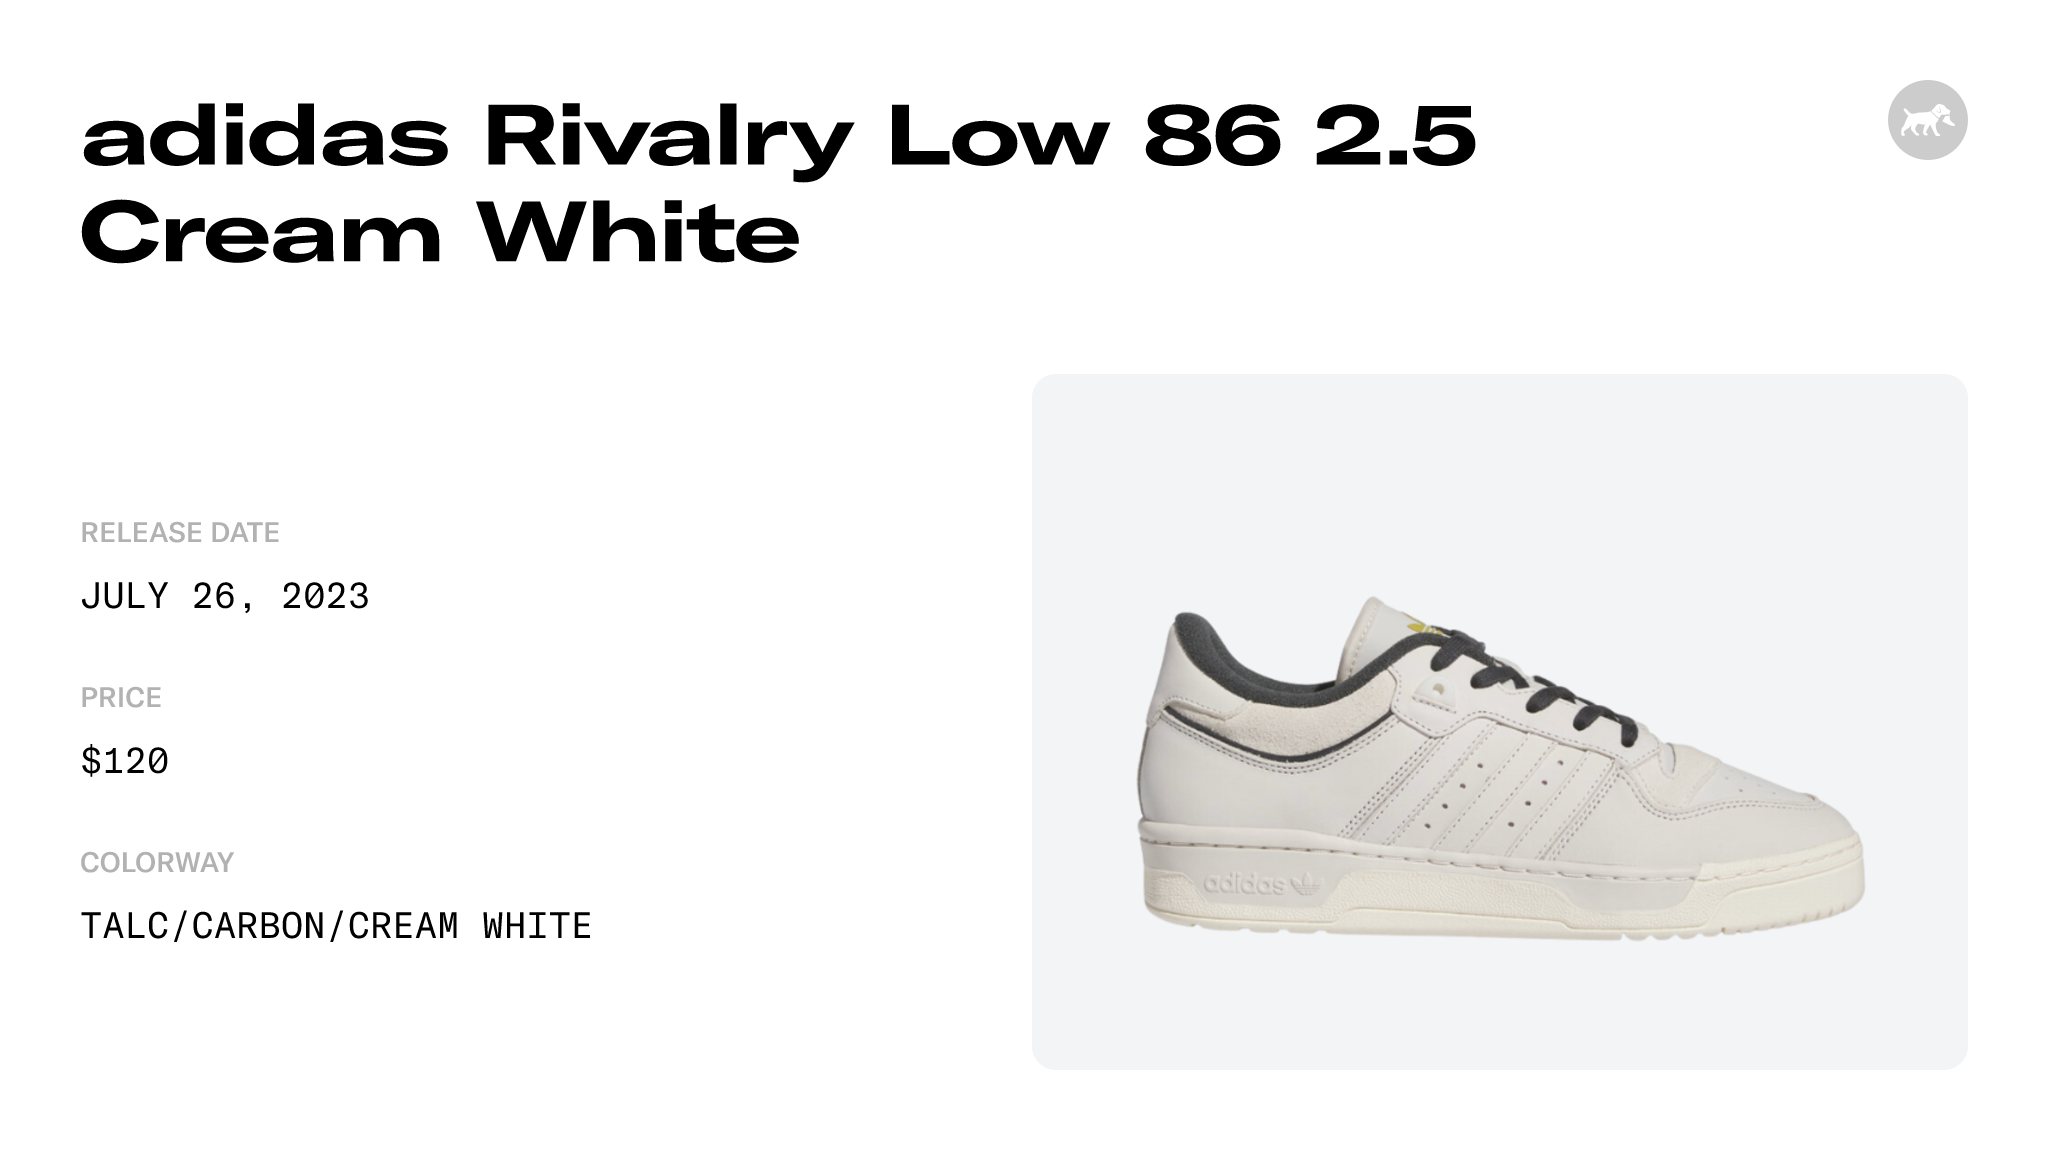 adidas Rivalry Low 86 2.5 Cream White - IF3402 Raffles and Release